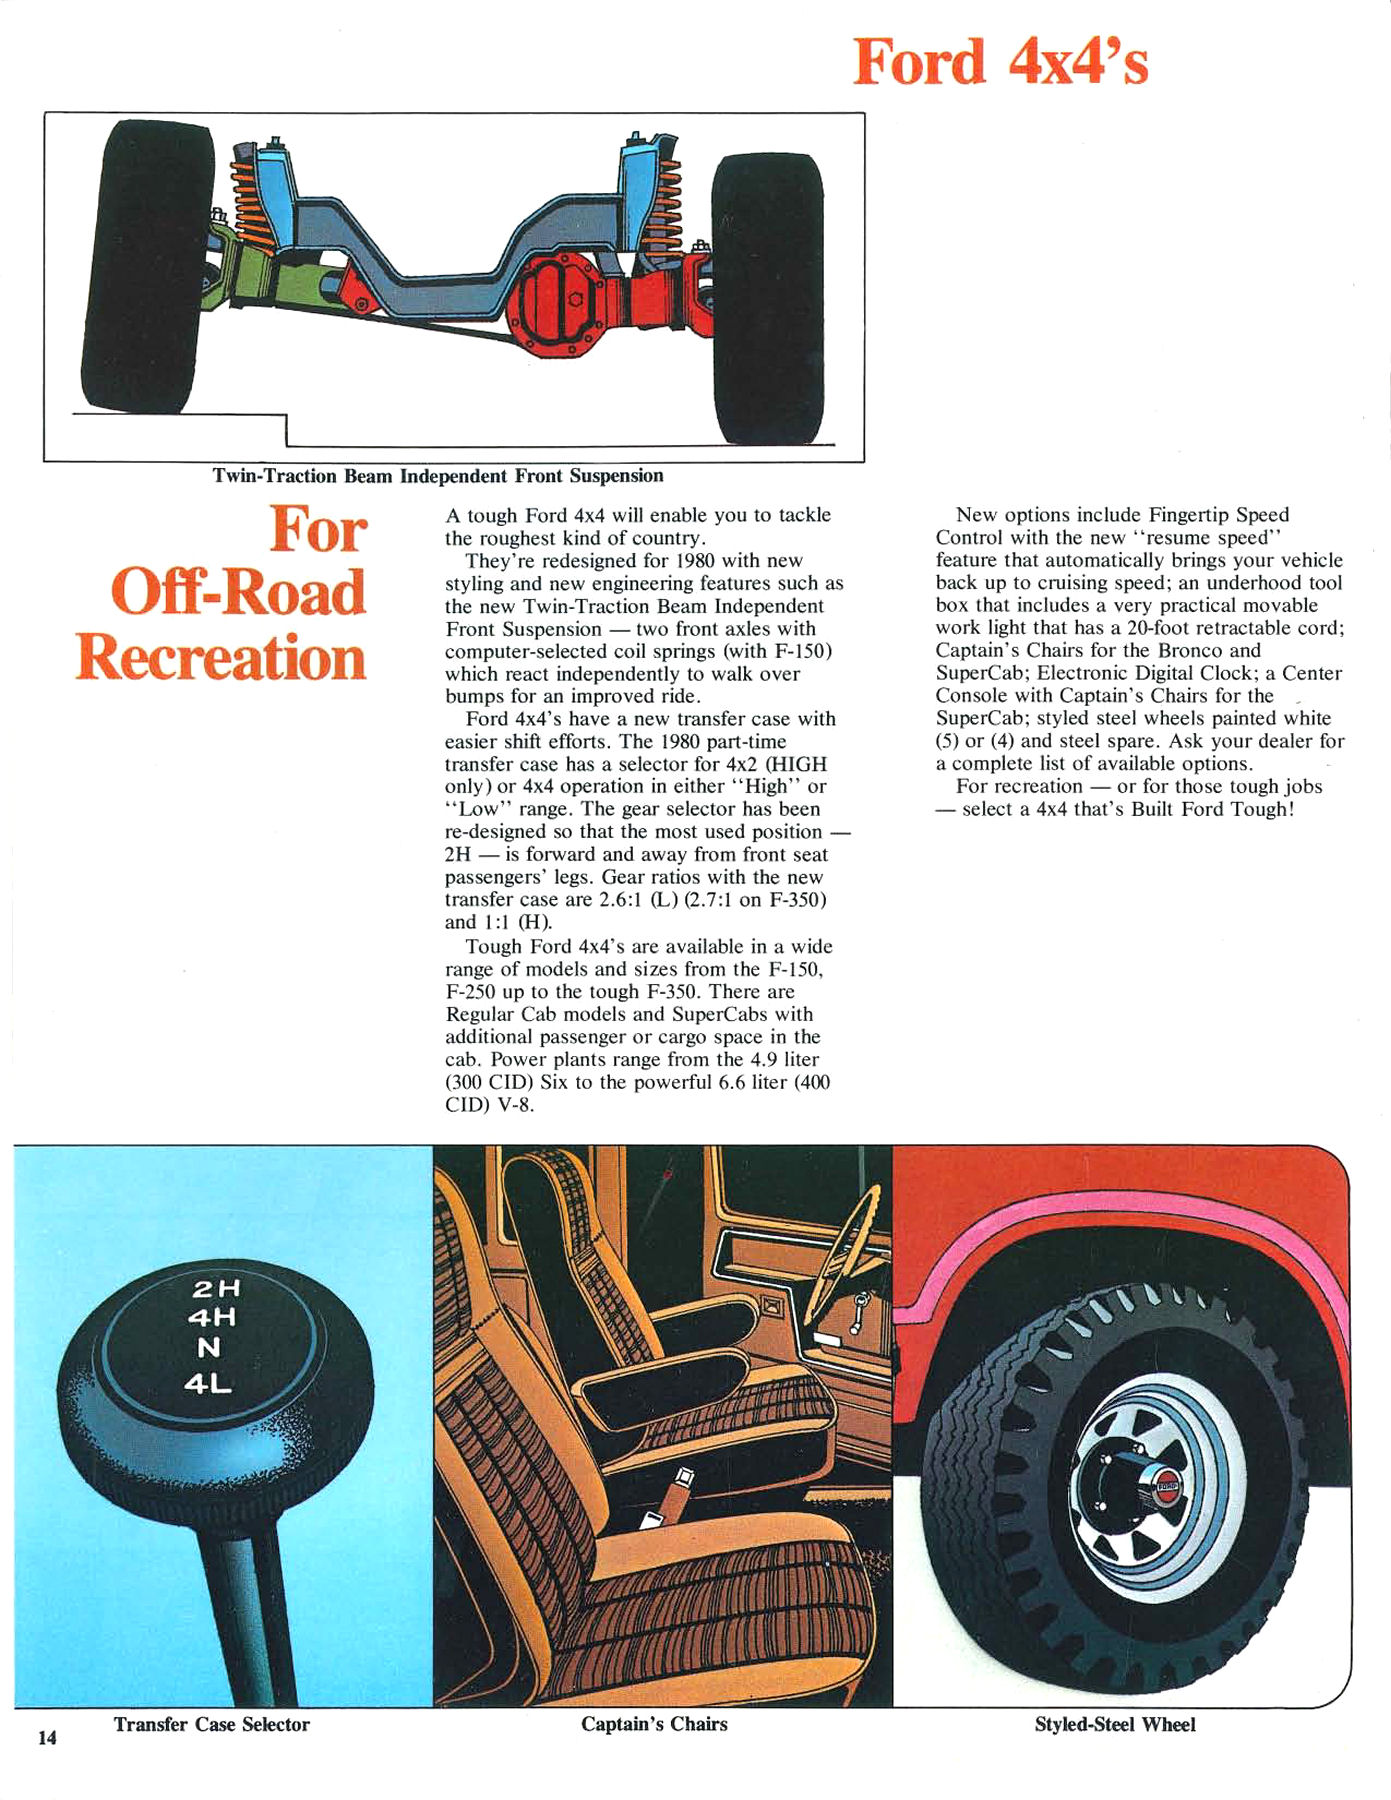 1980 Ford Recreation Vehicles-14